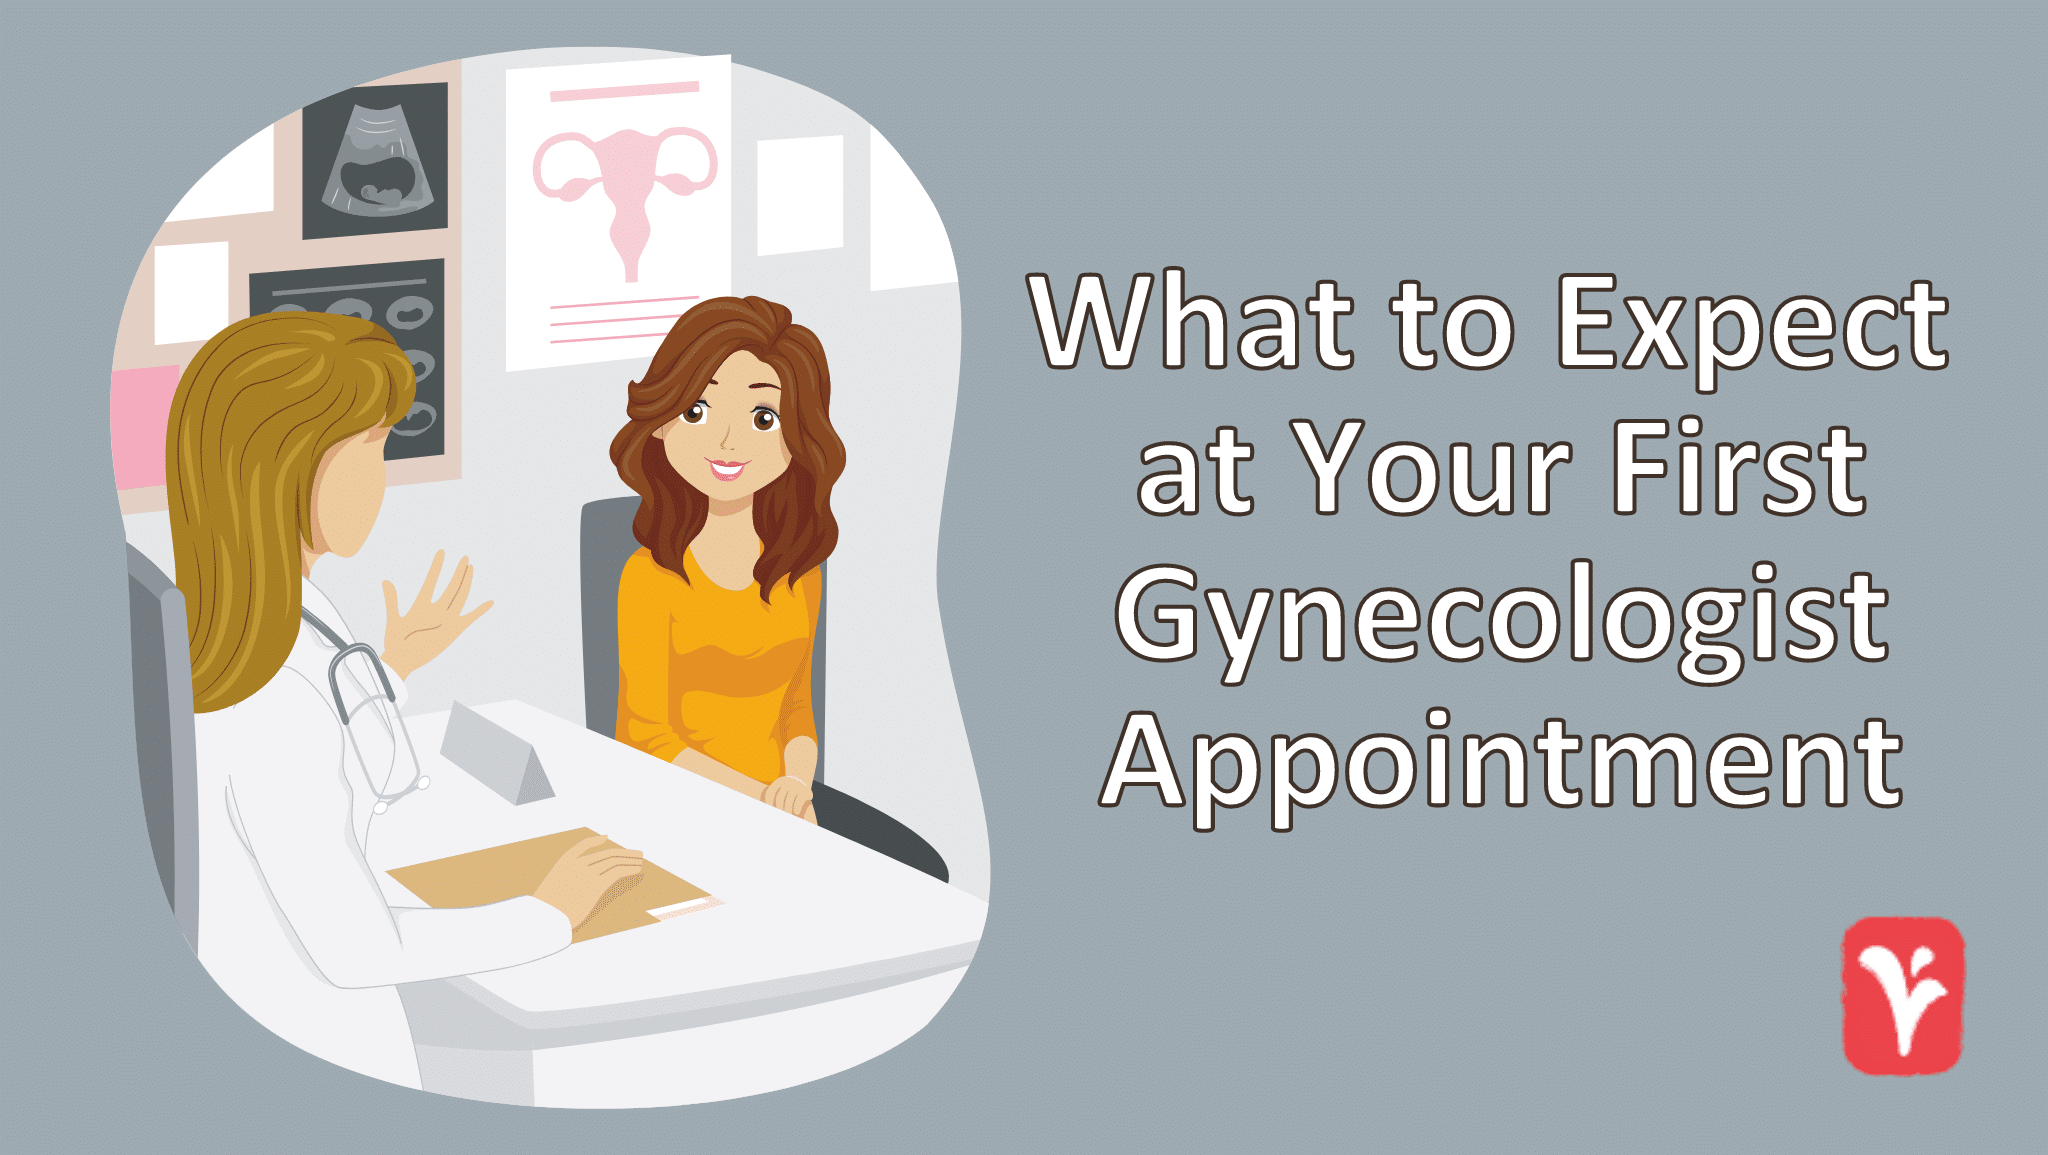 women speaking to doctor in office at first gynecologist appointment